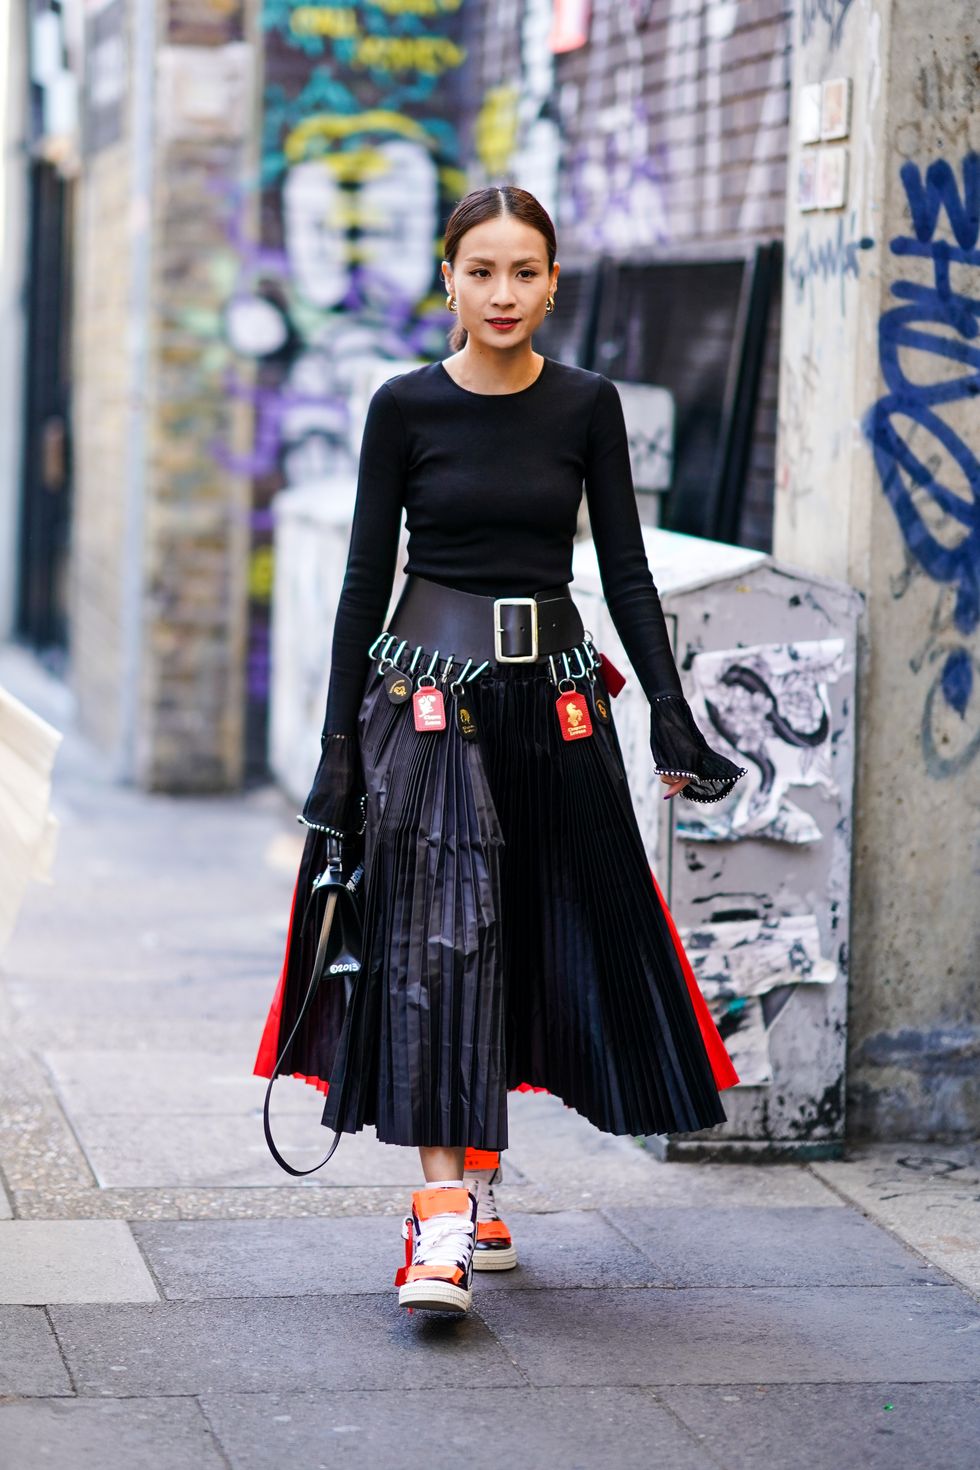 london, england september 14 a guest wears earrings, a black top with flared sleeves, a large leather belt with attached tags from chopova lowena, a pleated skirt, sneakers, during london fashion week september 2019 on september 14, 2019 in london, england photo by edward berthelotgetty images